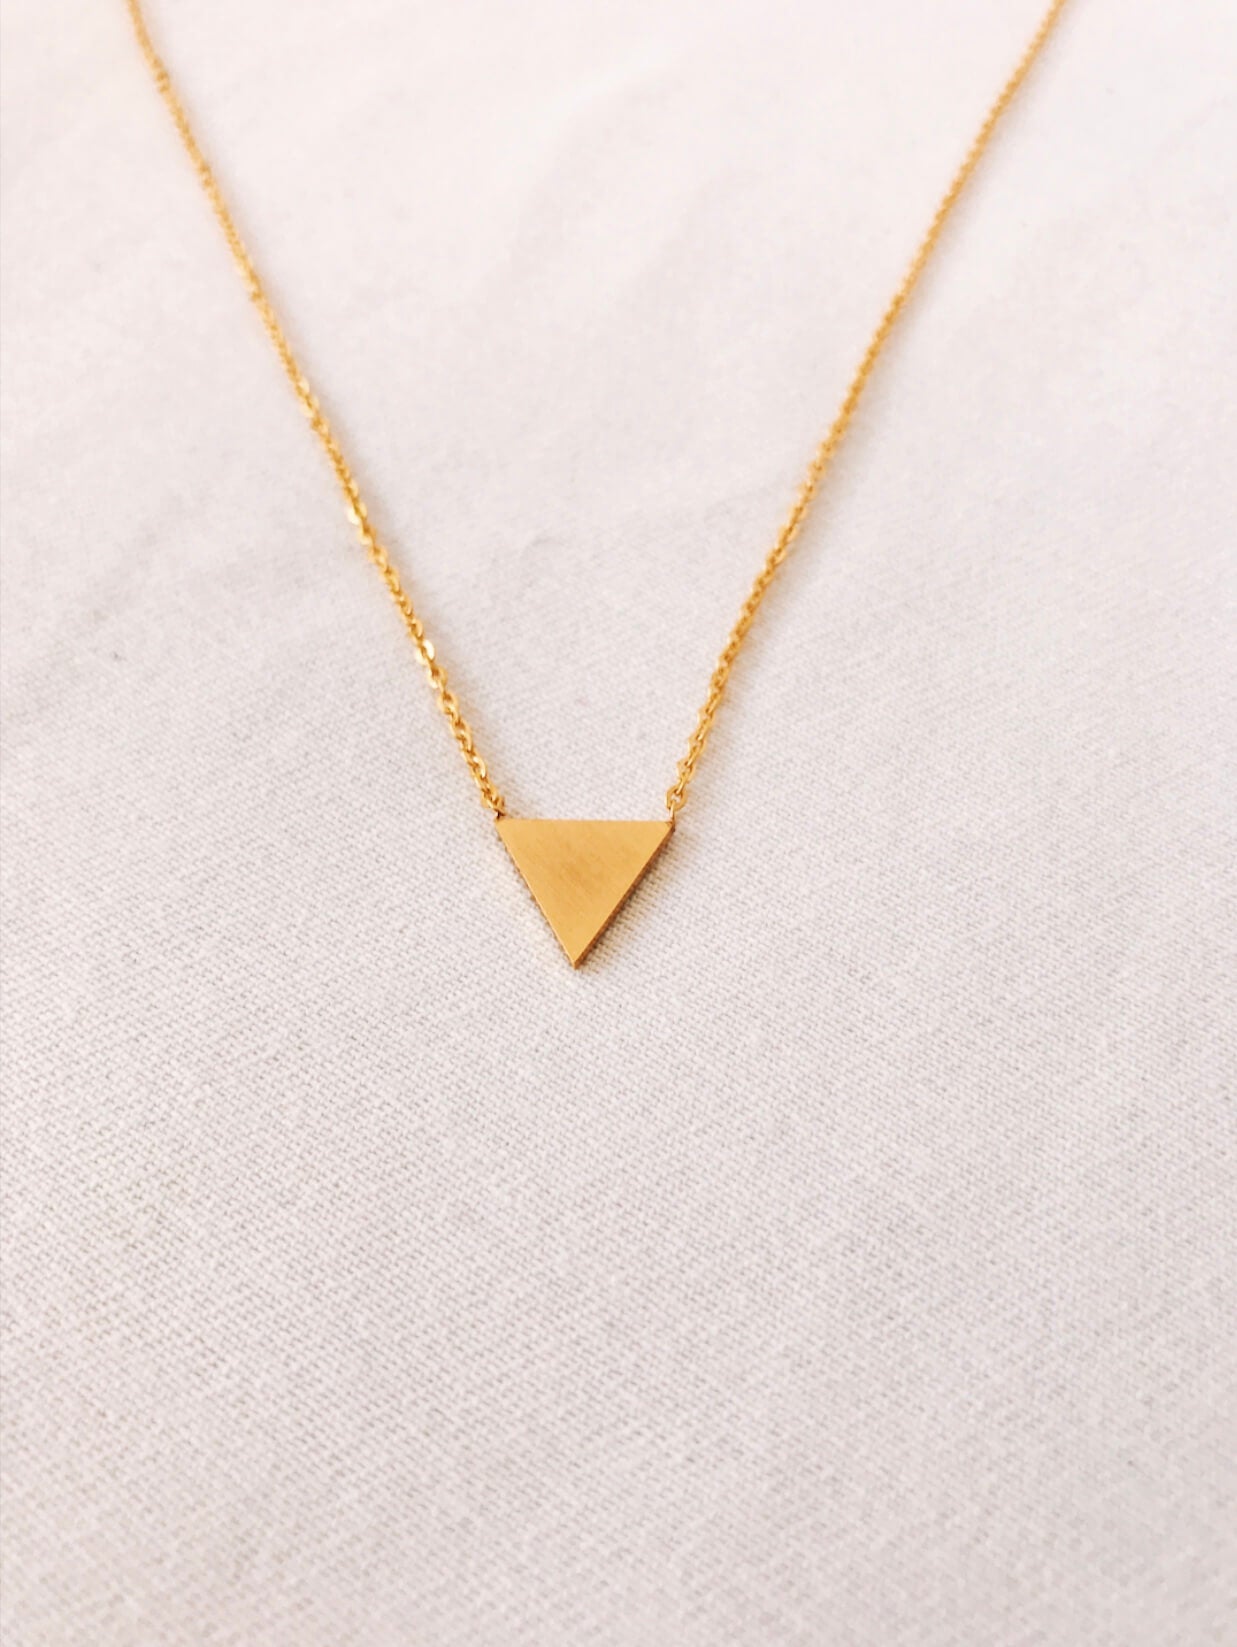 The Gold Triangle Necklace